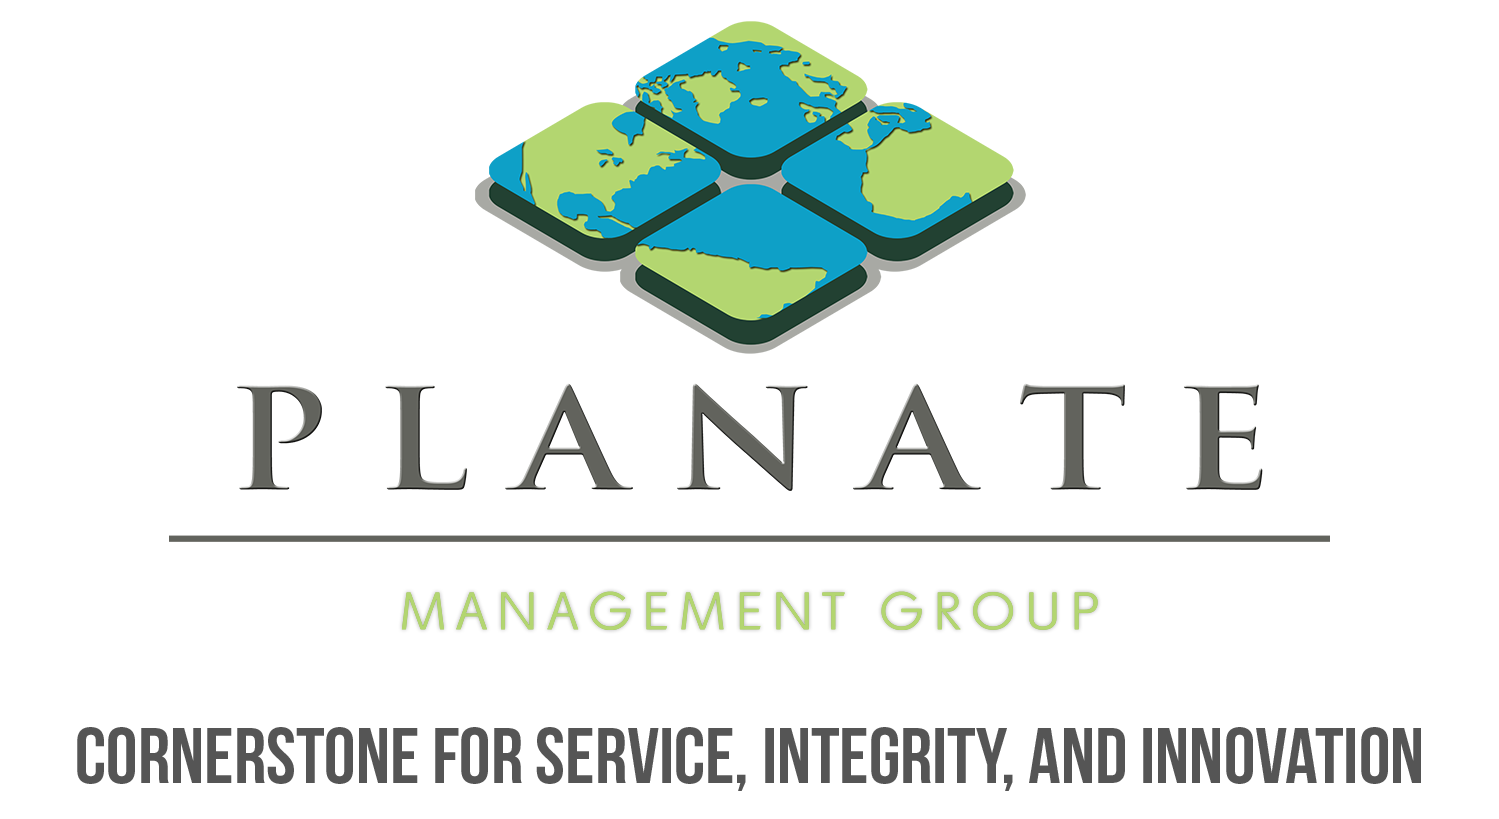 Planate was Awarded a Multi-year Subcontract on the Defense Threat Reduction Agency’s Cooperative